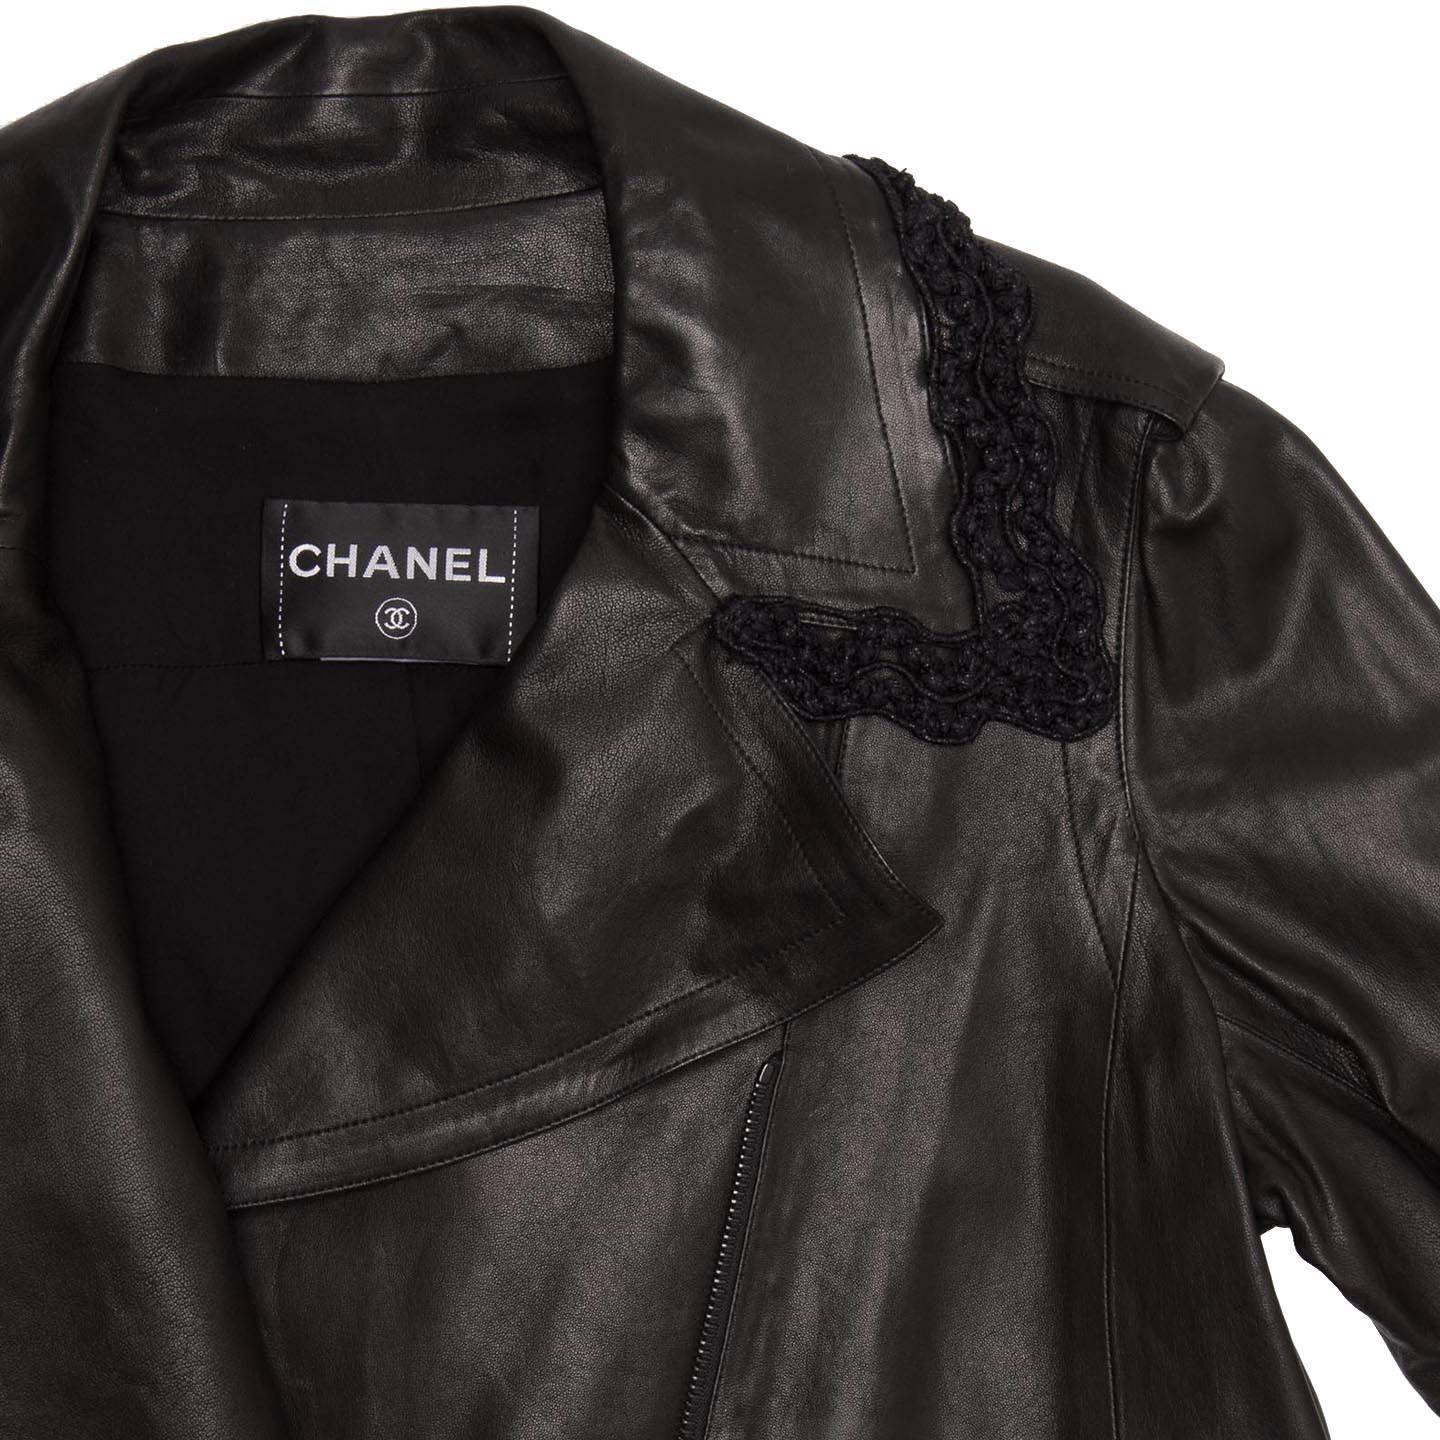 Chanel Black Leather & Lace Moto Style Jacket In New Condition For Sale In Brooklyn, NY